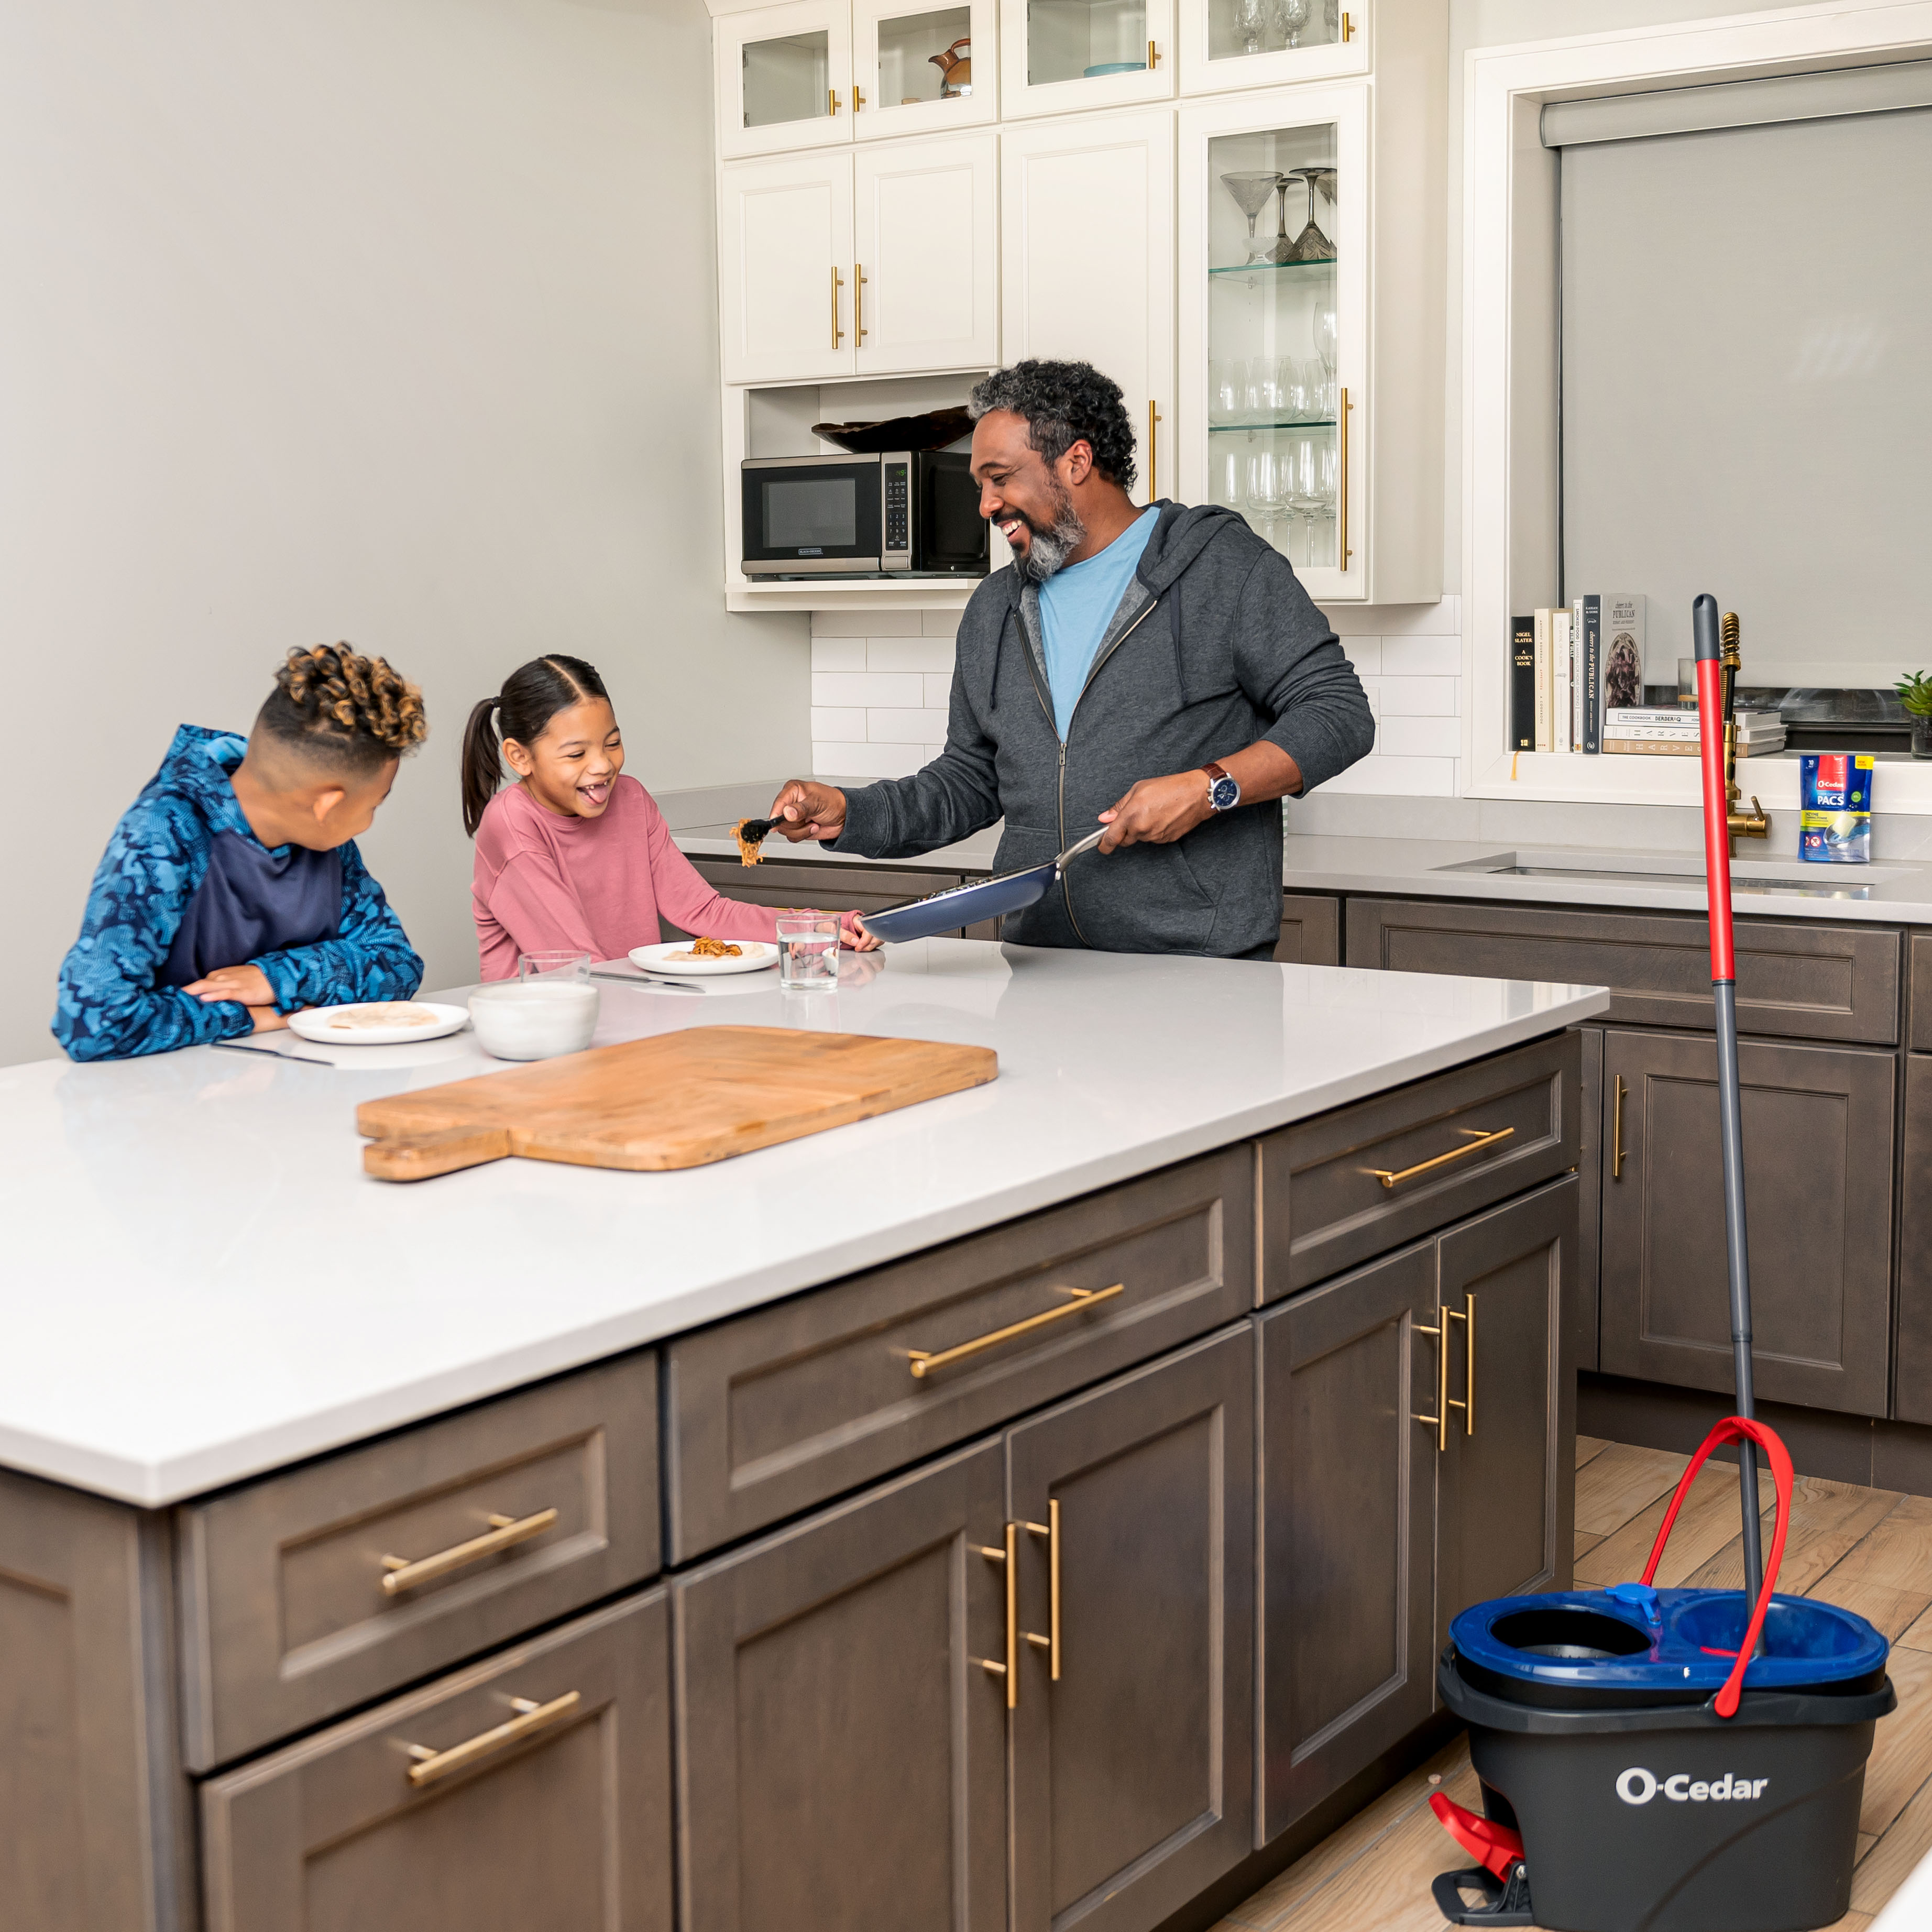 O-Cedar EasyWring RinseClean Spin Mop and Bucket System, Hands-Free System - image 14 of 25